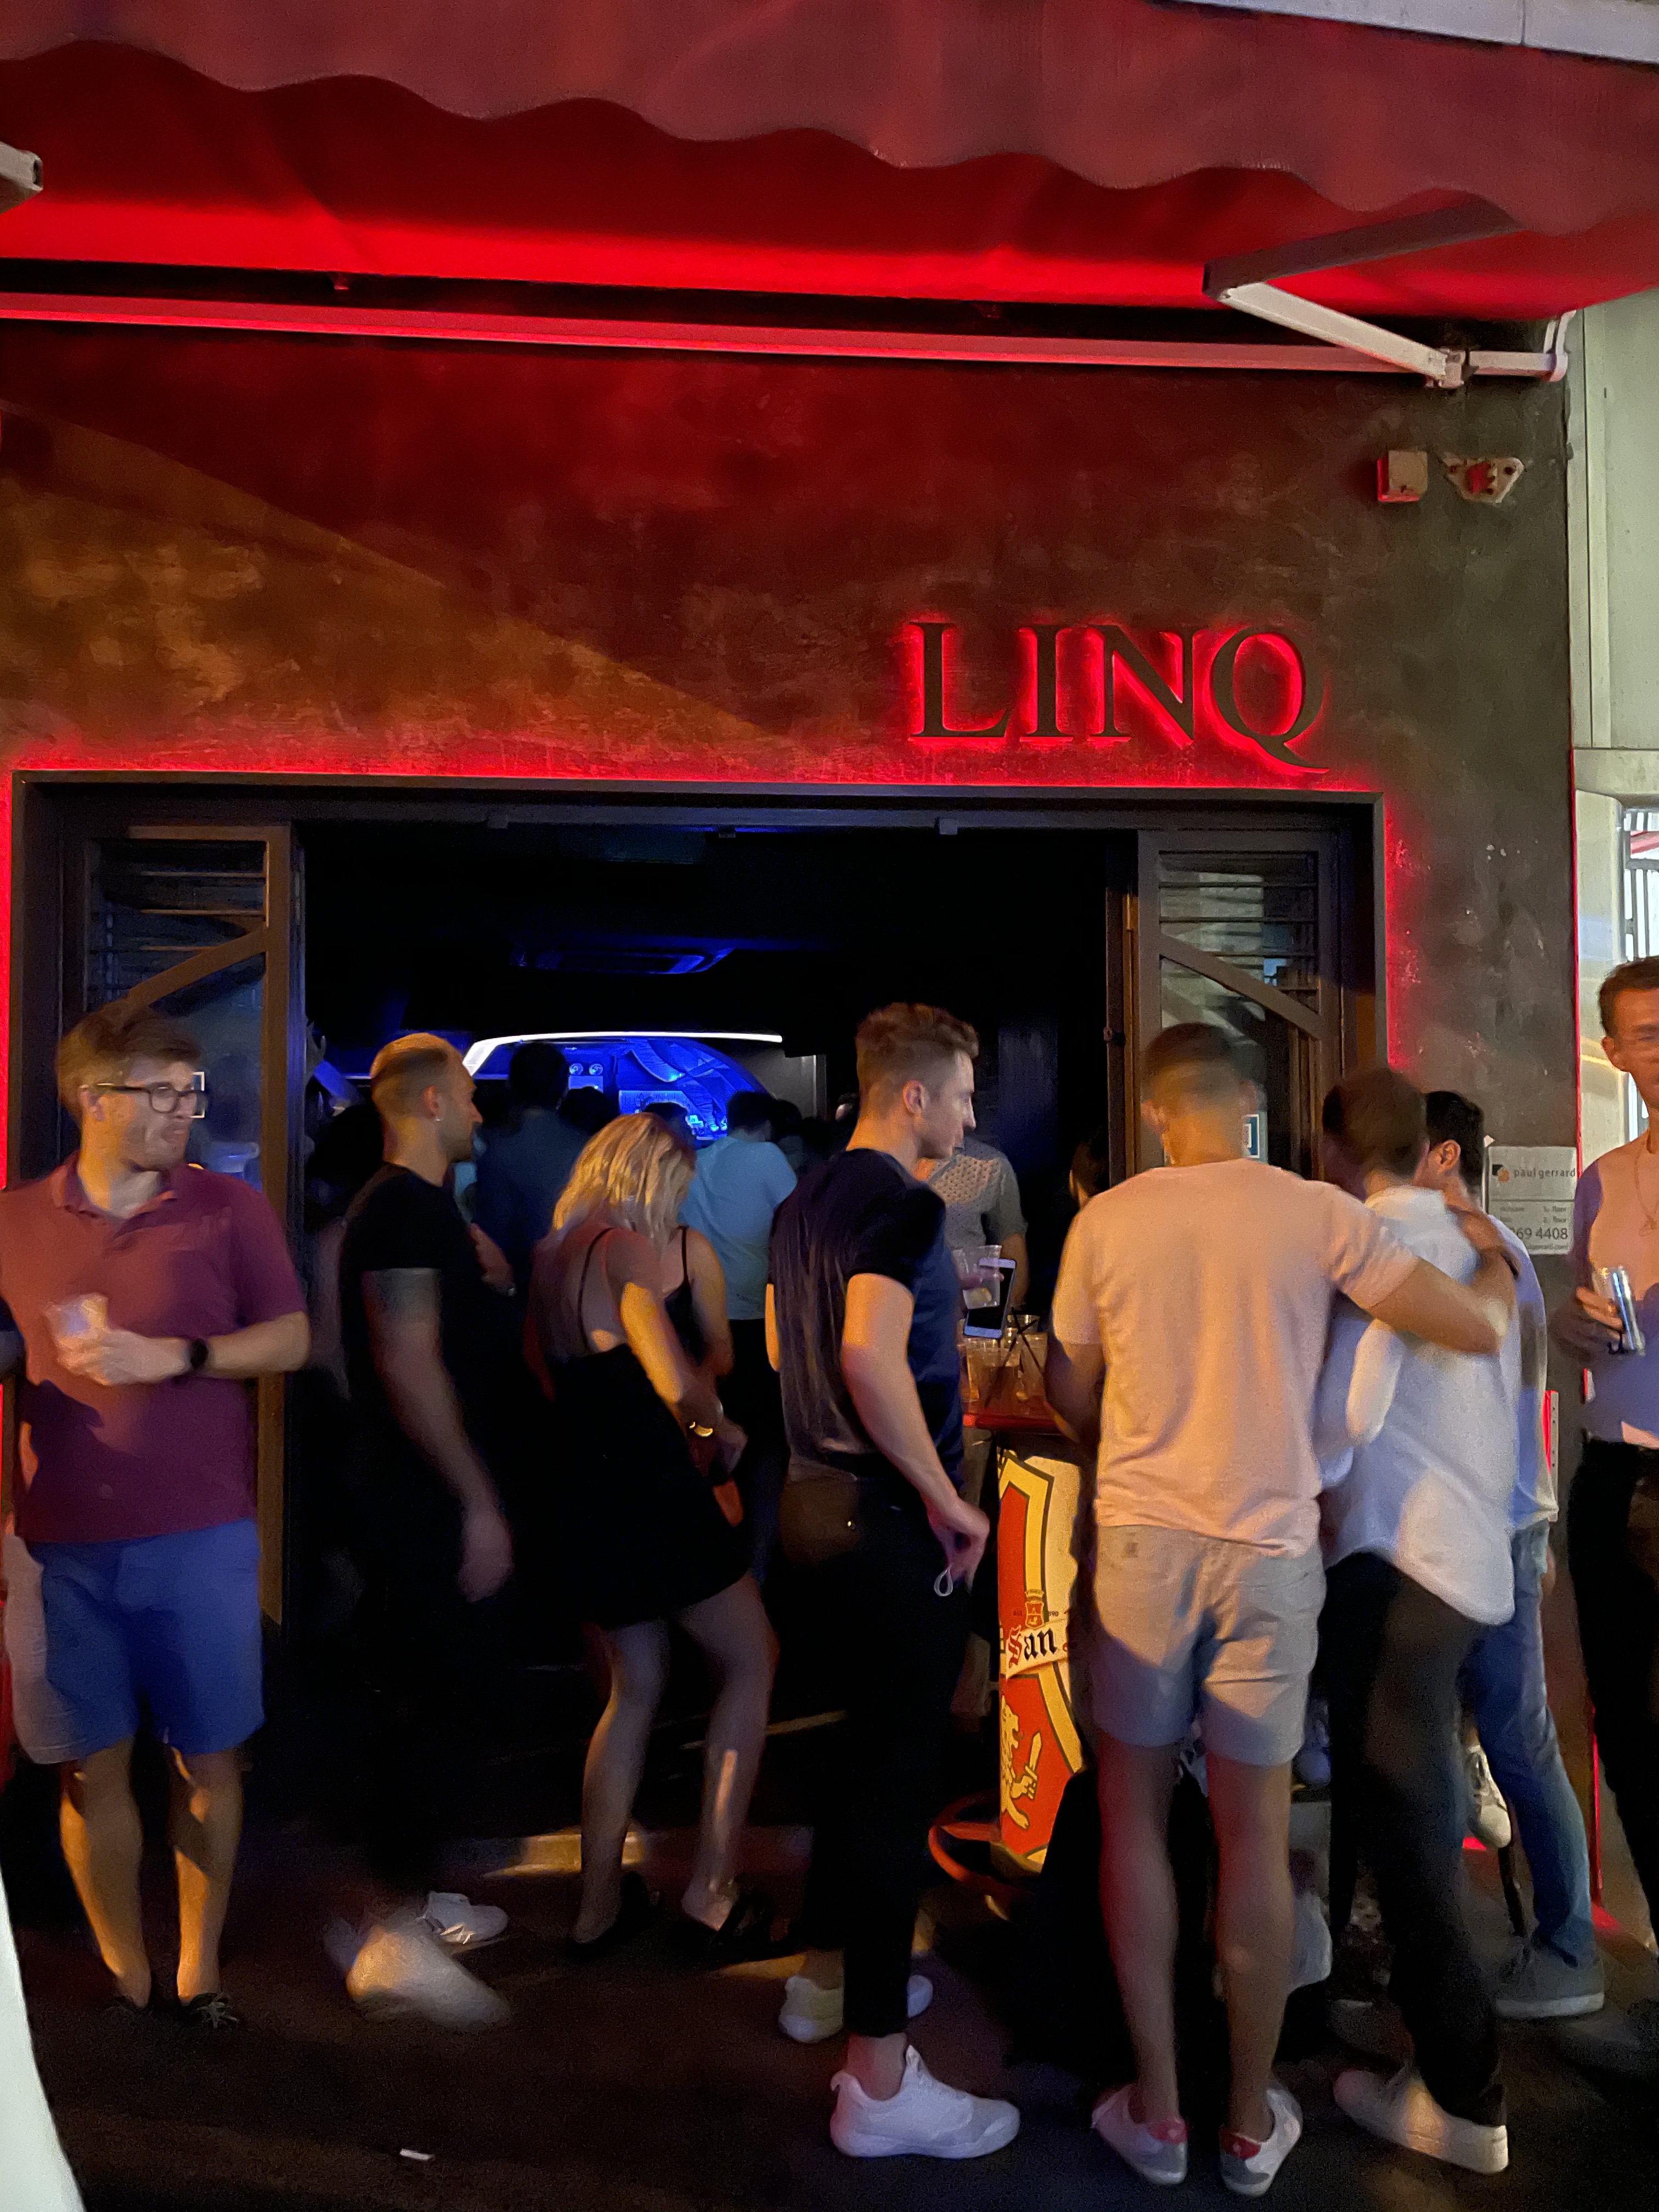 Patrons crowd outside Linq Bar in Hong Kong's Central district on April 30, 2021—after it re-opened following 5 months closed due to COVID-19 restrictions. Hong Kong's new rules require bar visitors and staff to be vaccinated. (Amy Gunia–TIME)